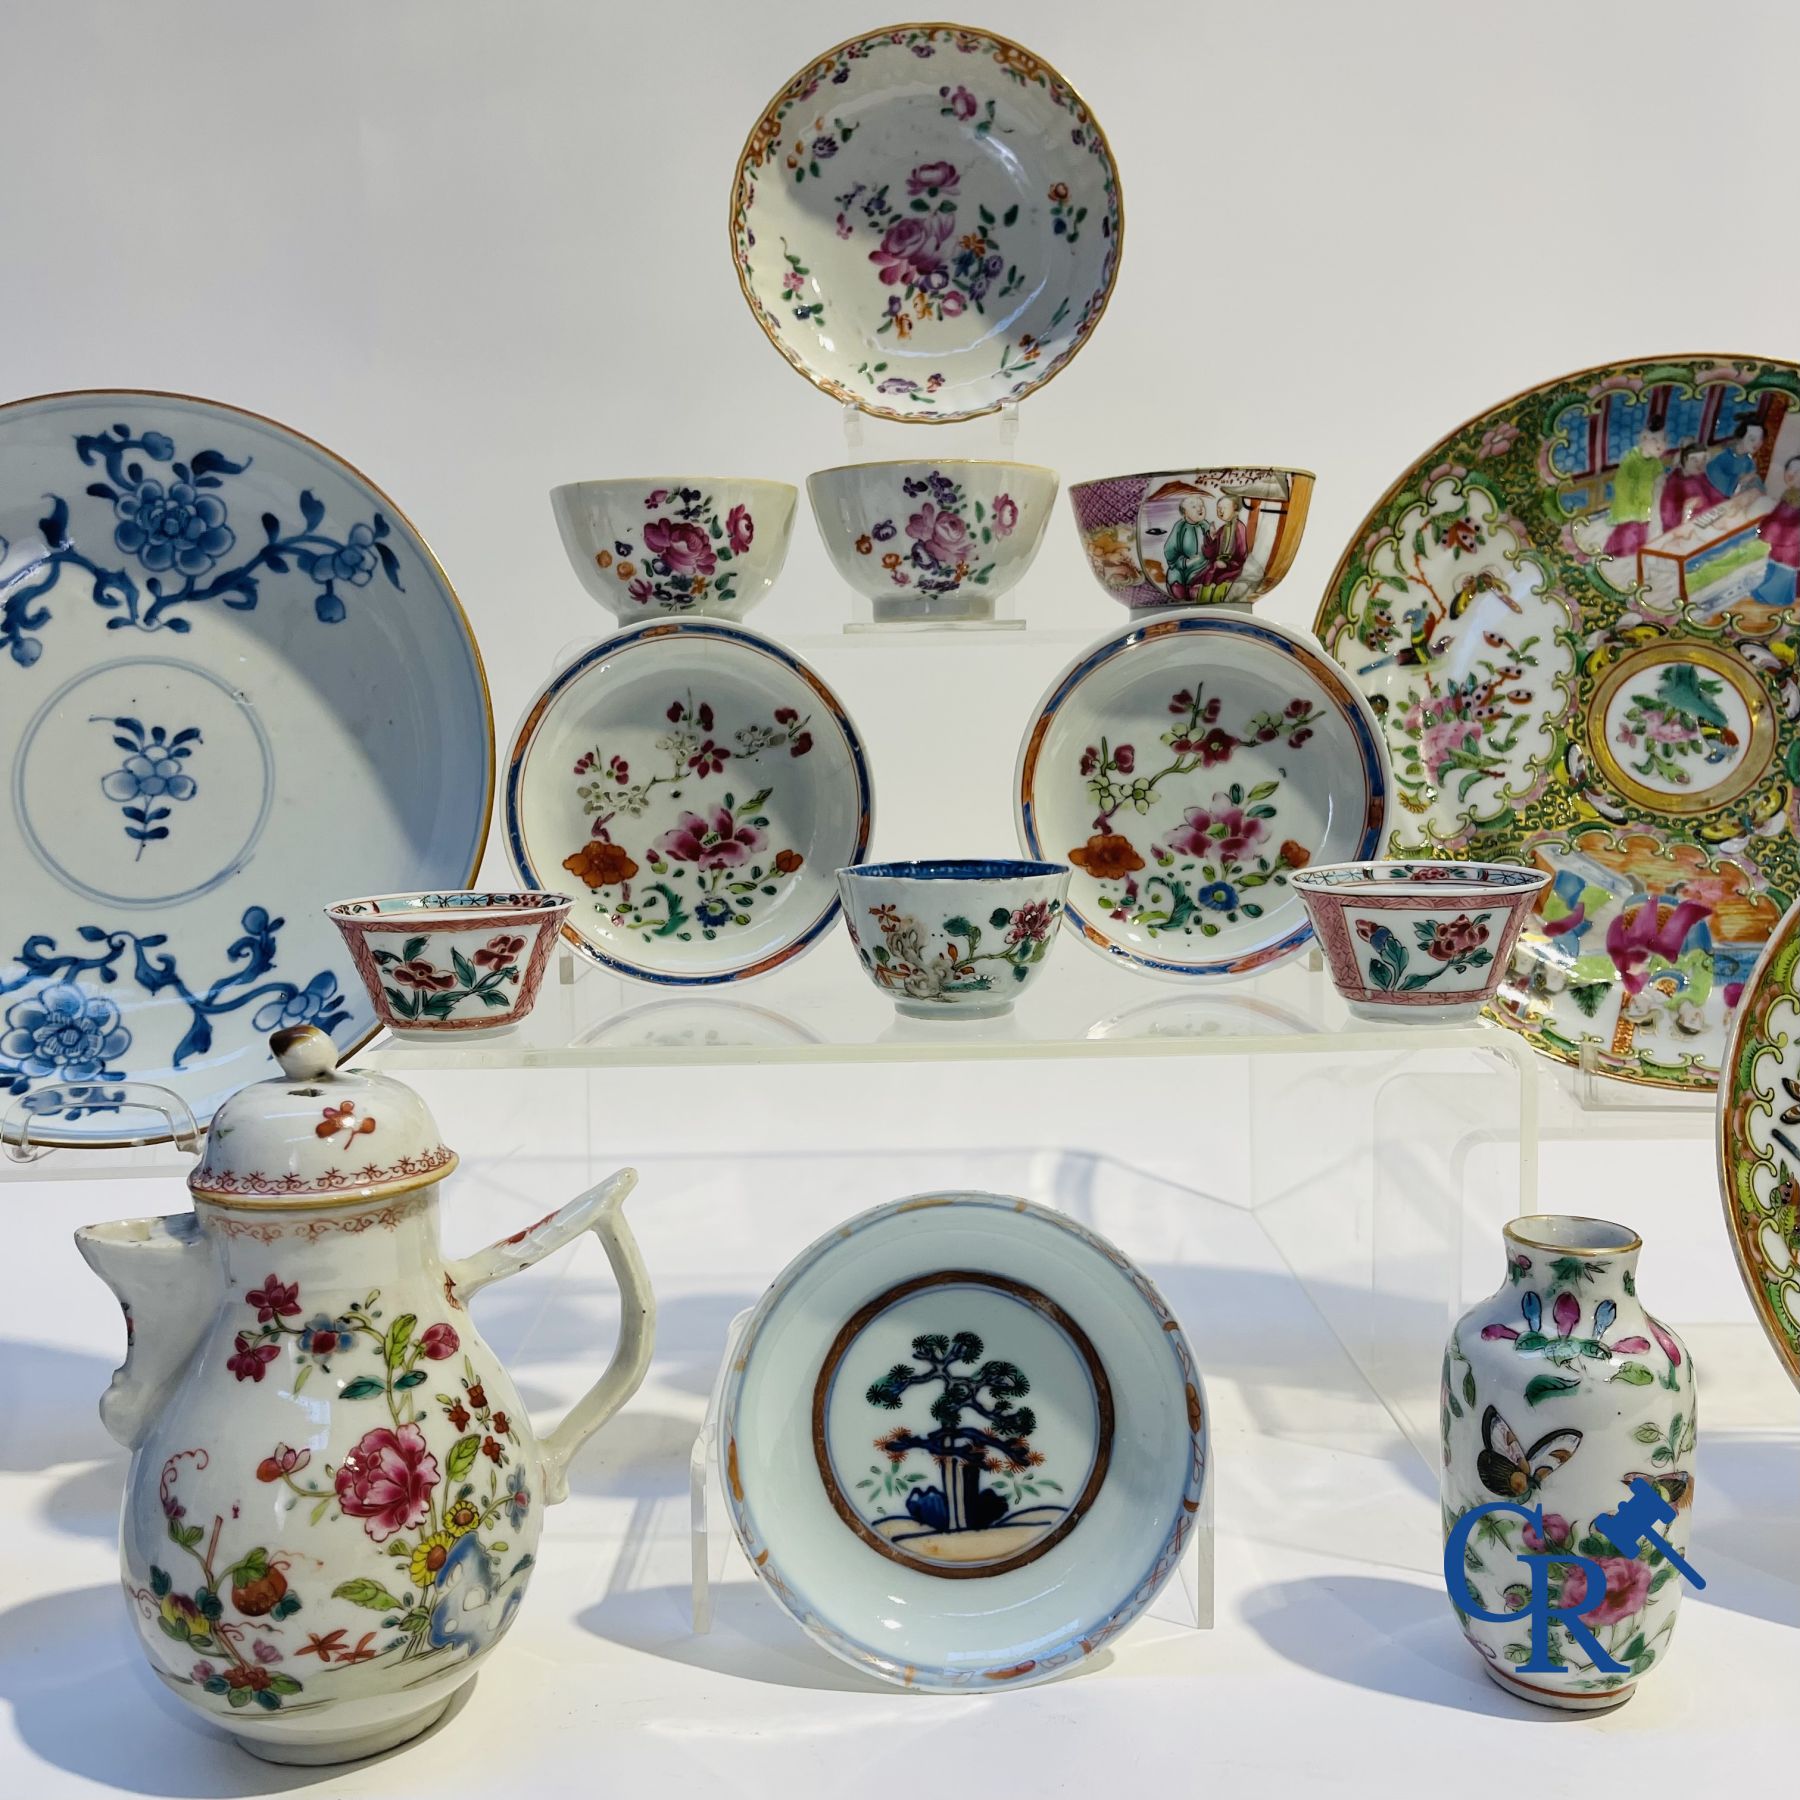 Chinese porcelain: 16 pieces of 18th and 19th century Chinese porcelain. - Image 2 of 33